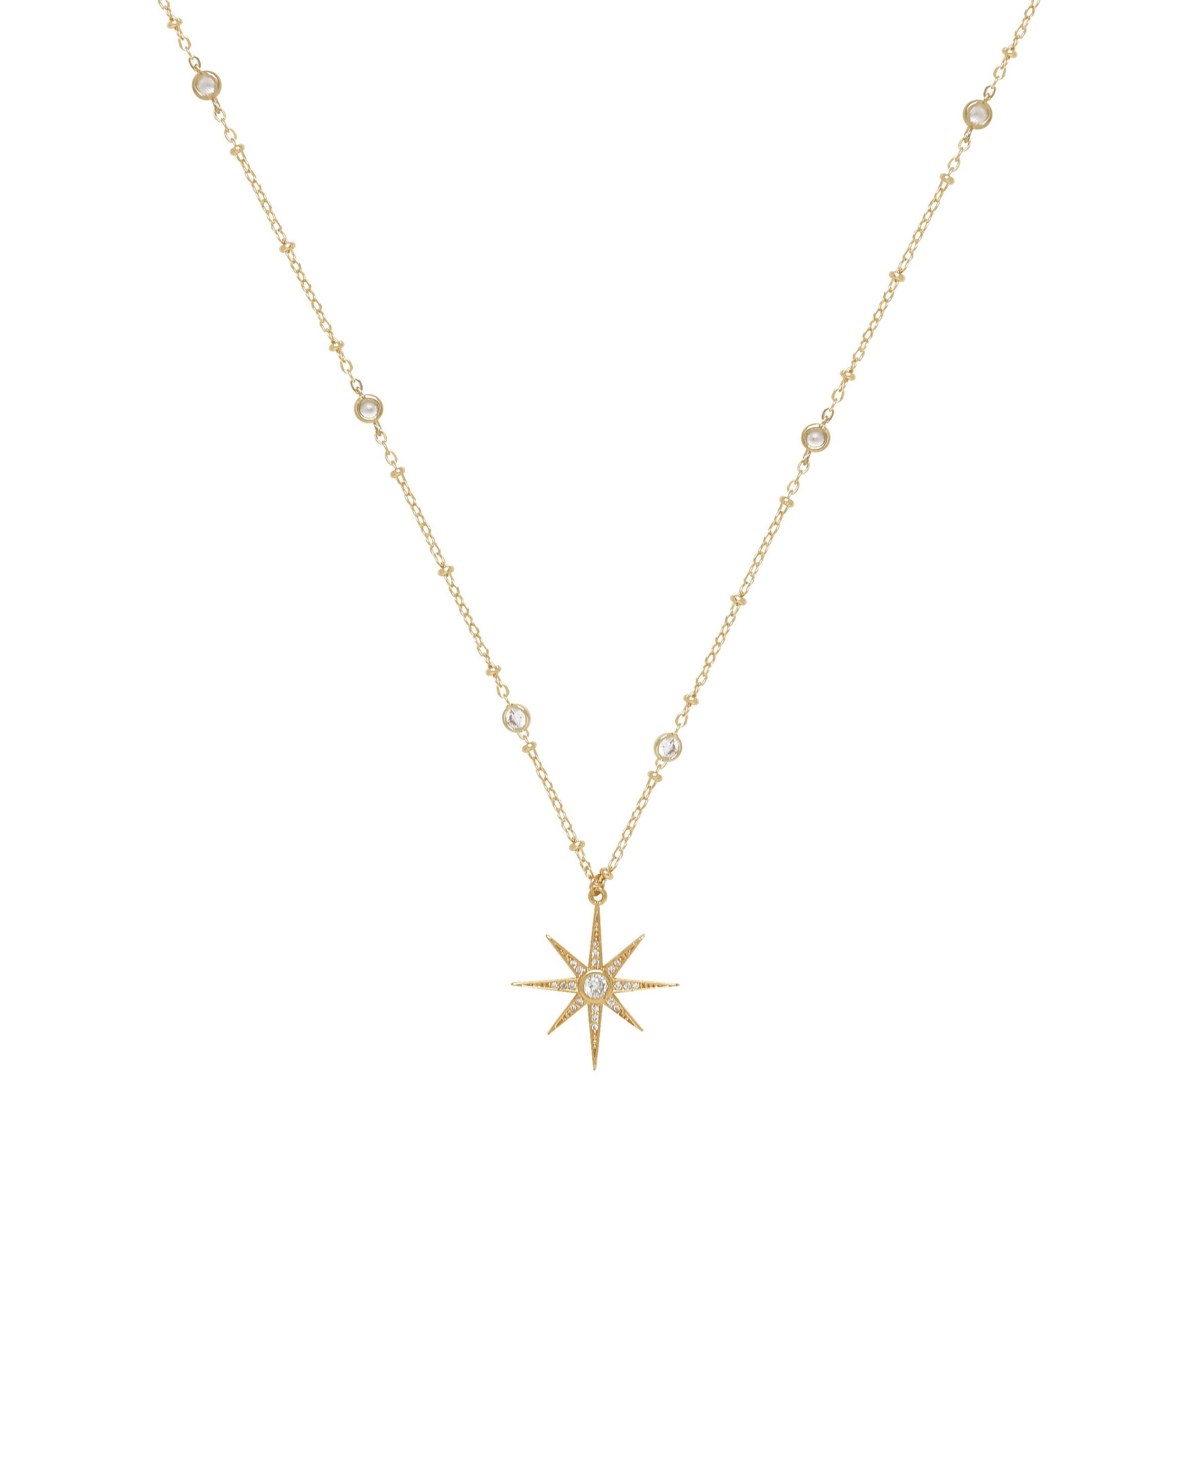 Crystal Chain Star Necklace - Gold Plated